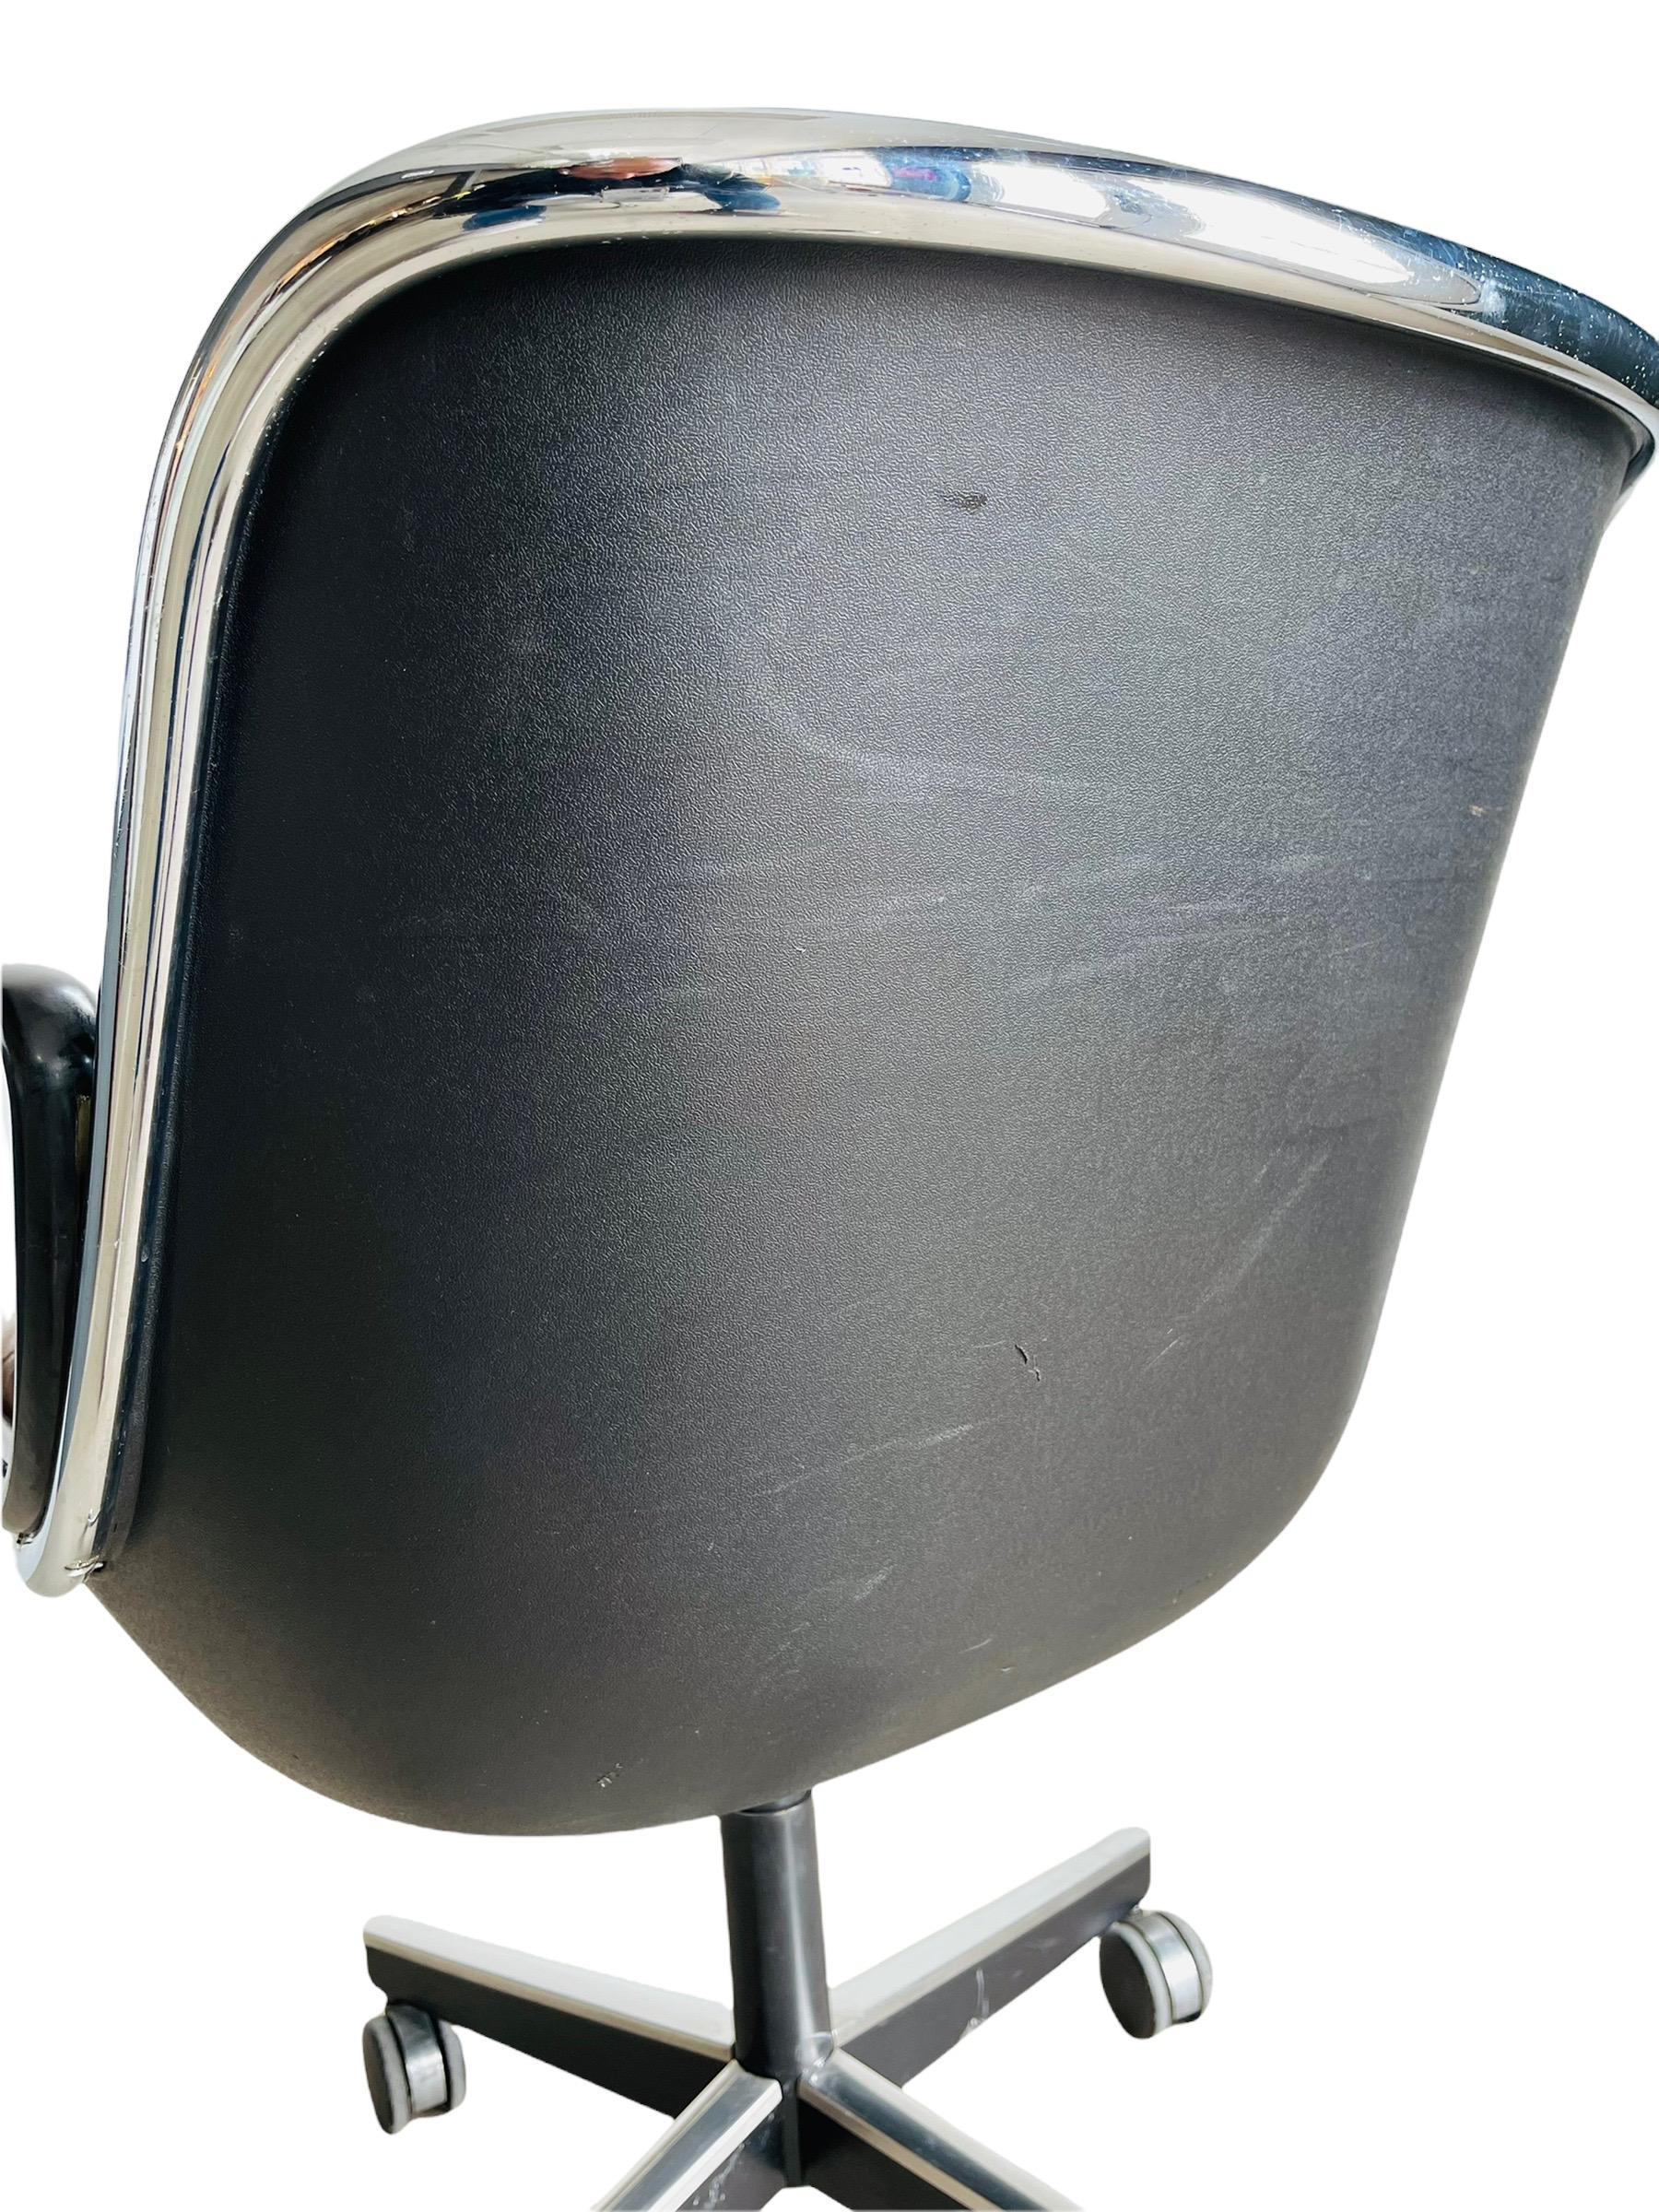 Stainless Steel Pollock Executive Office Armchair Designed by Charles Pollock for Knoll